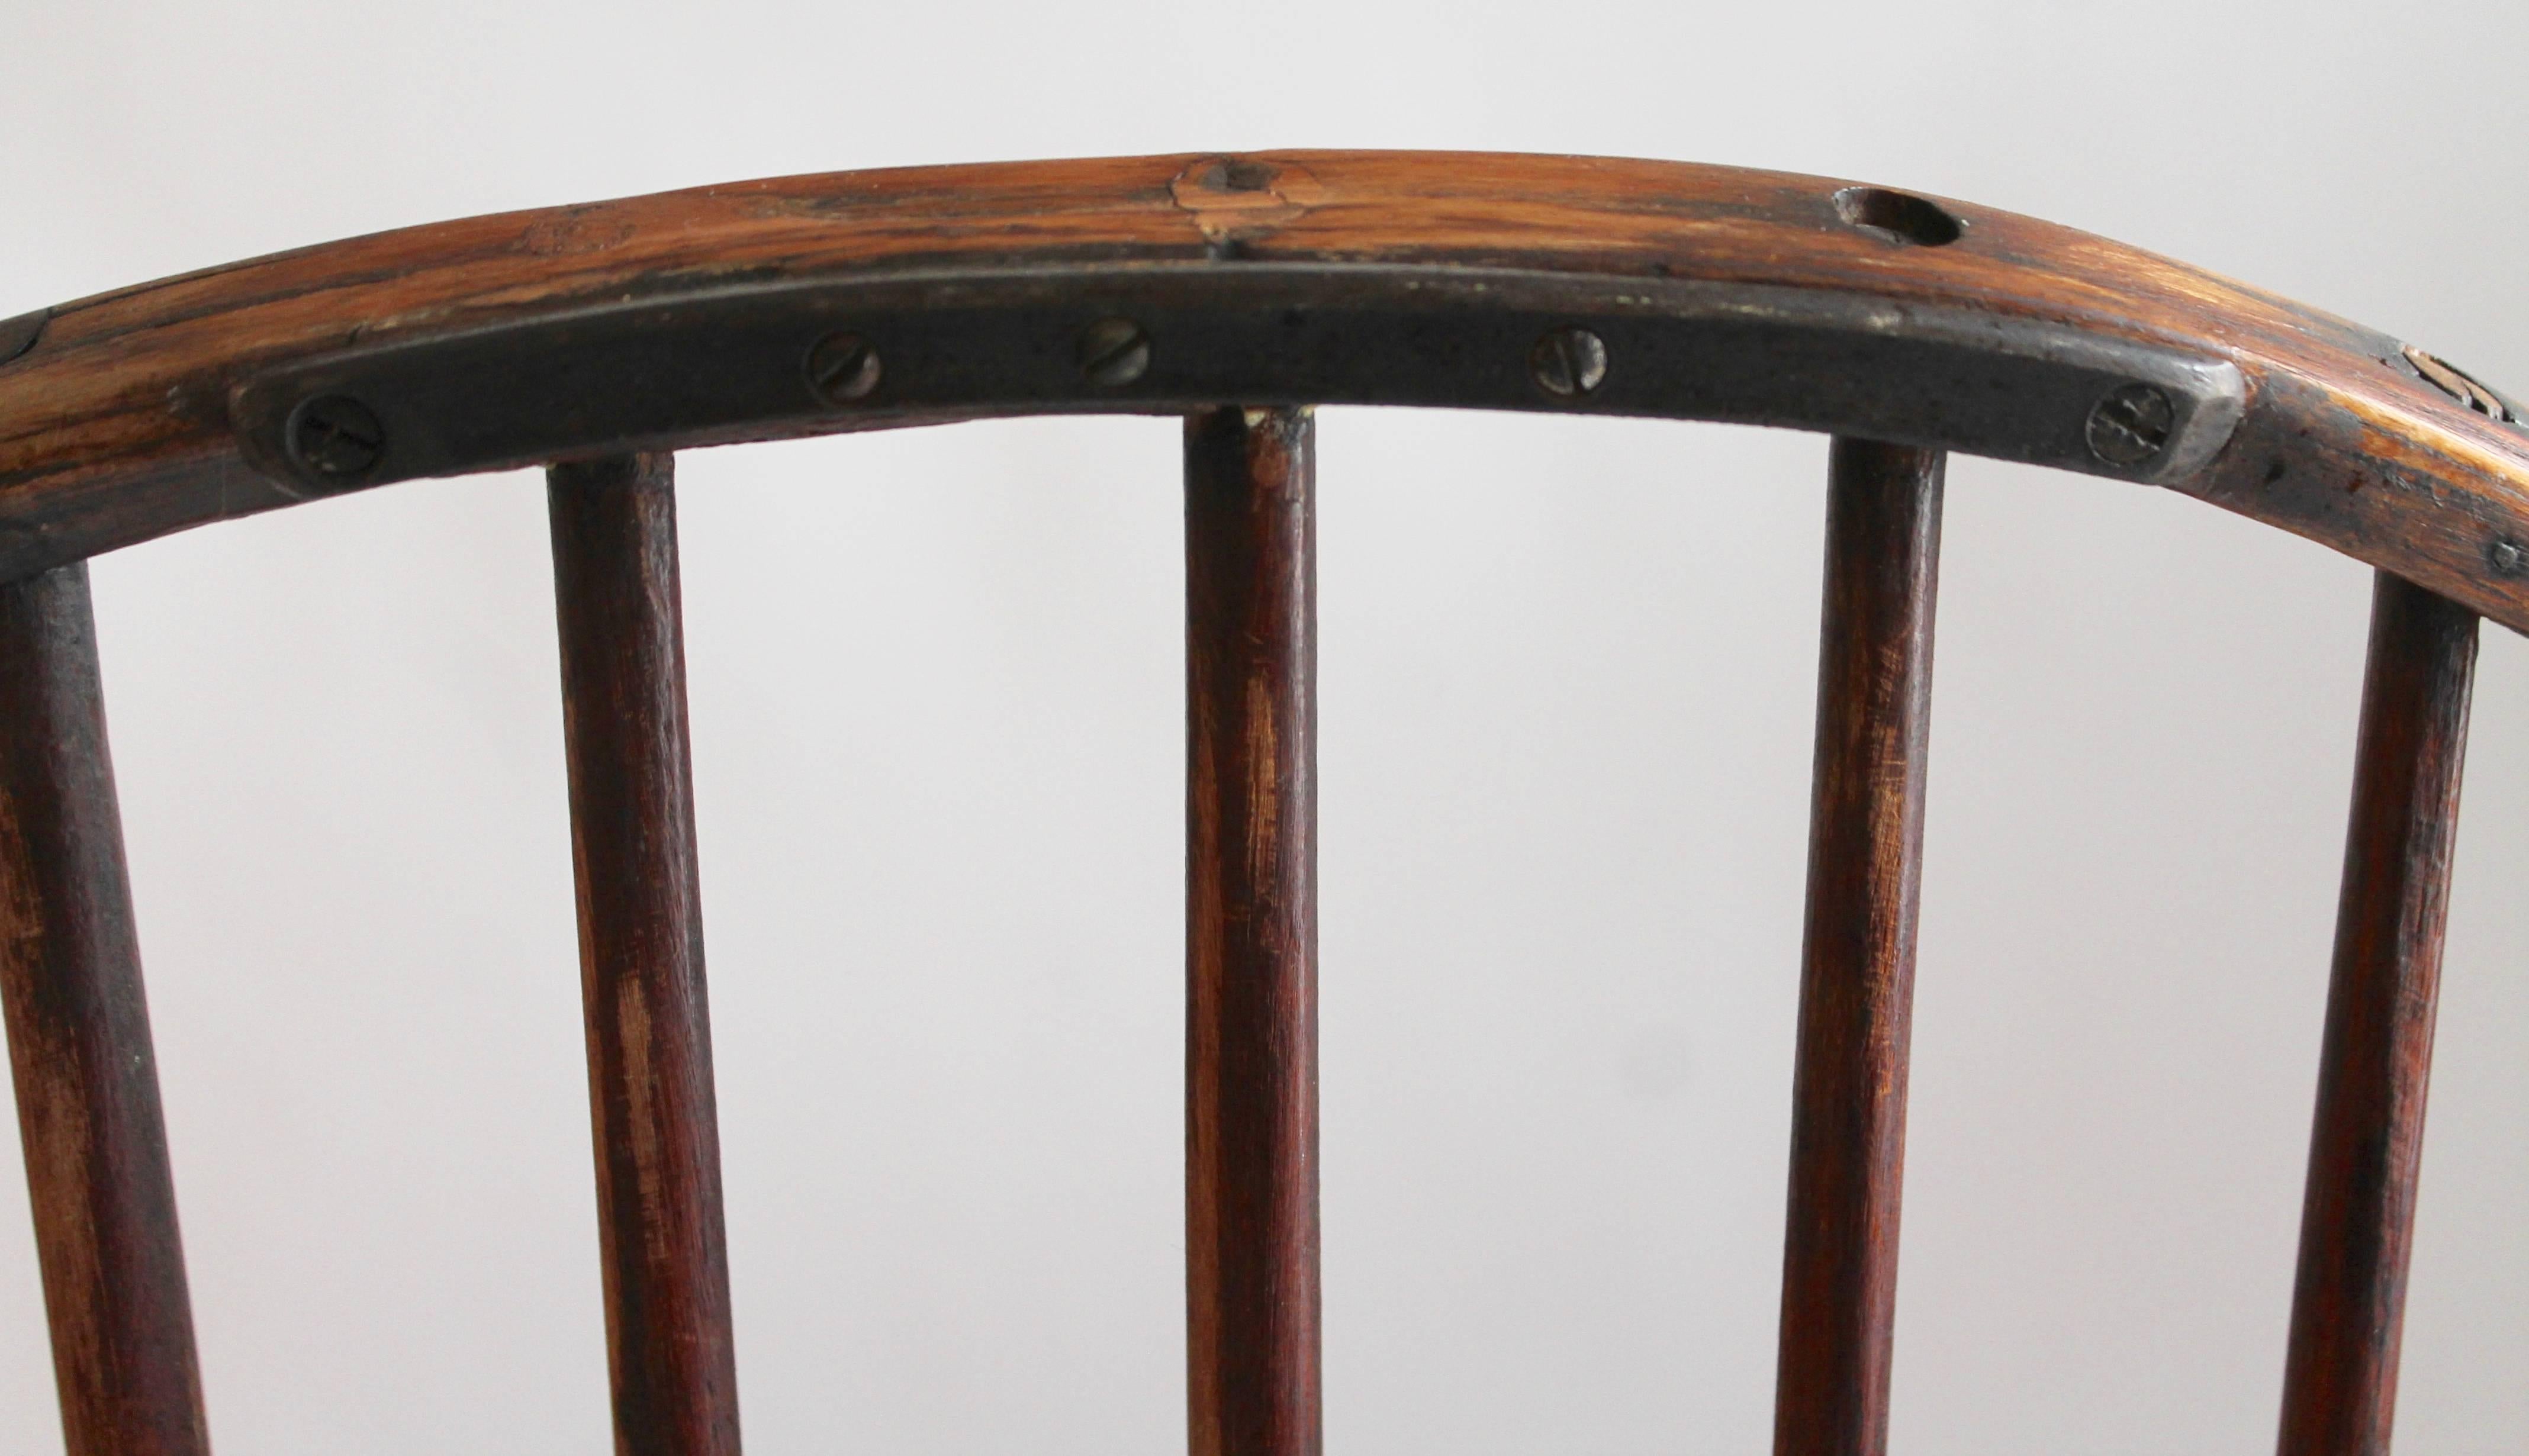 Patinated Early 18th Century English Windsor Chair